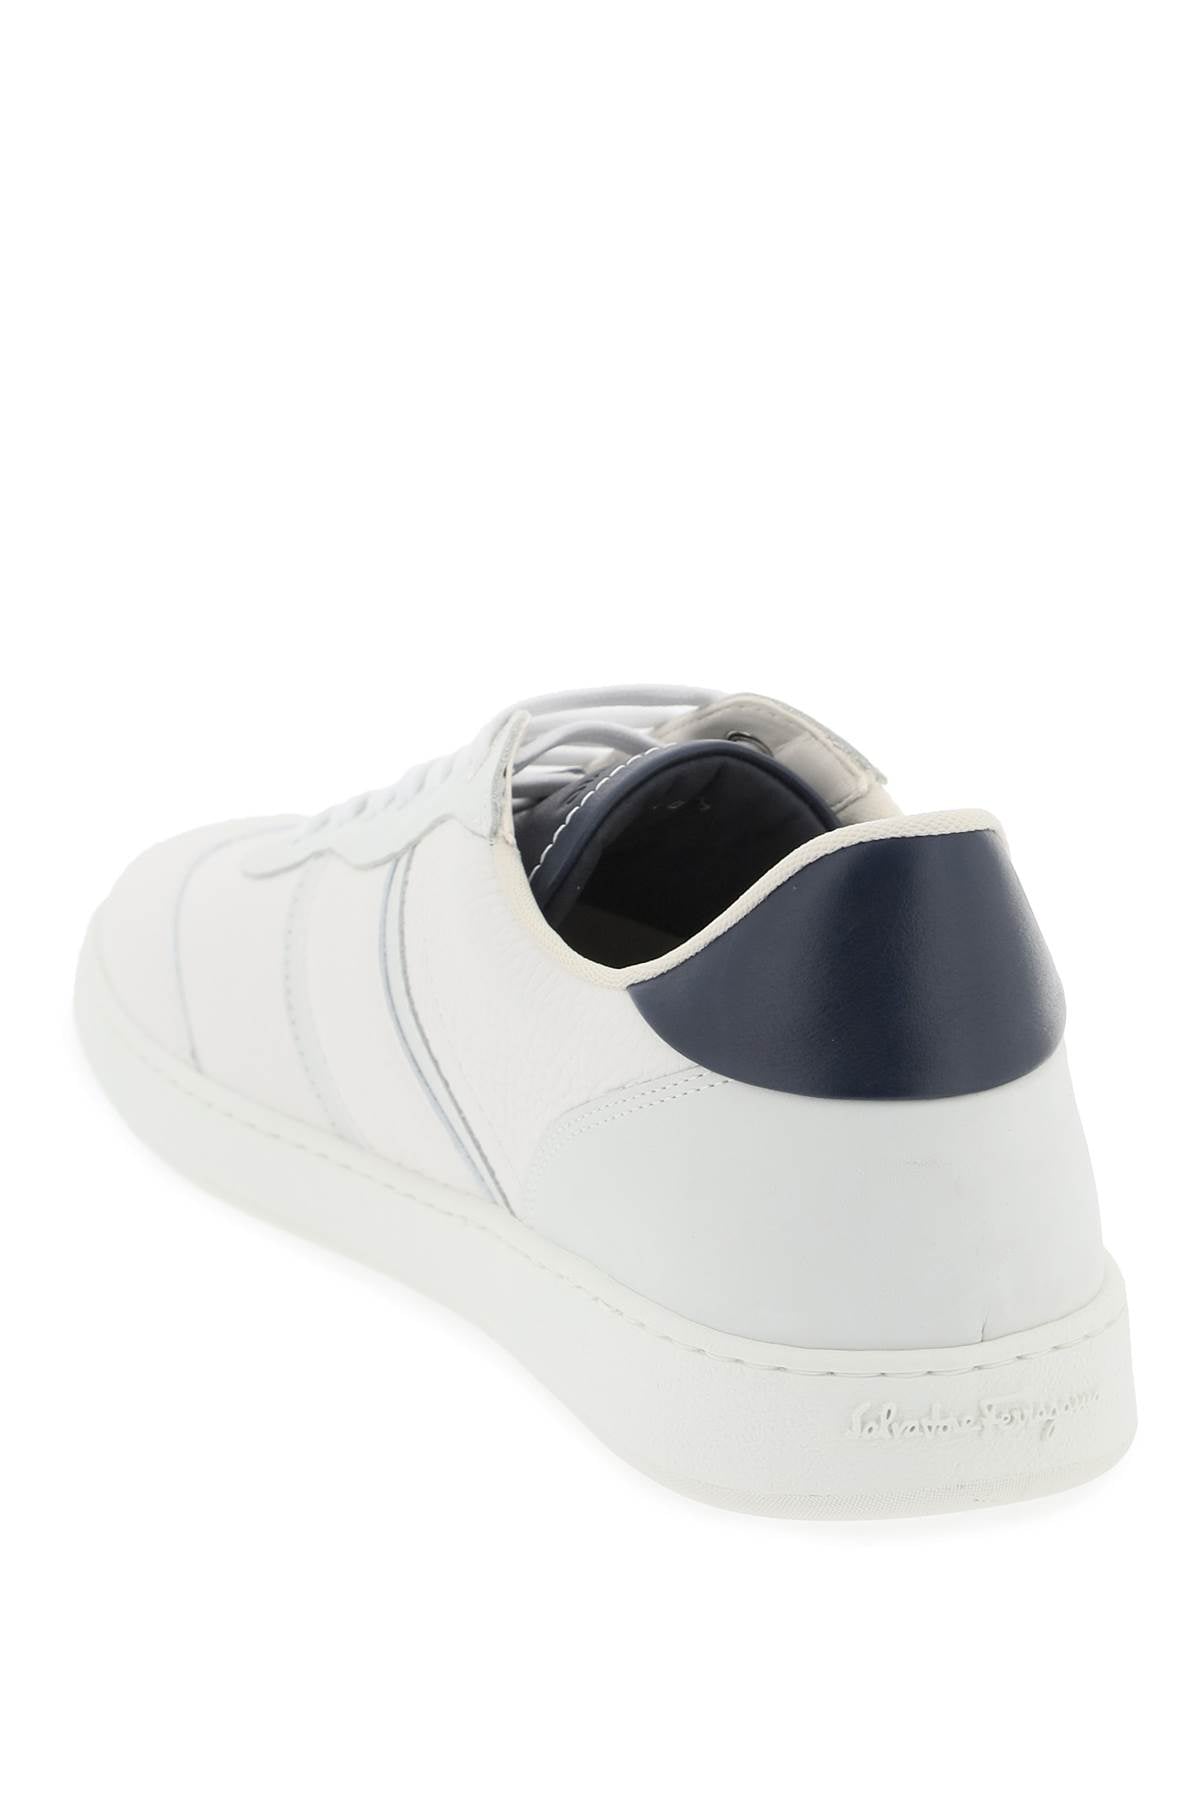 FERRAGAMO Hammered Leather Sneaker with Metallic Accents for Women